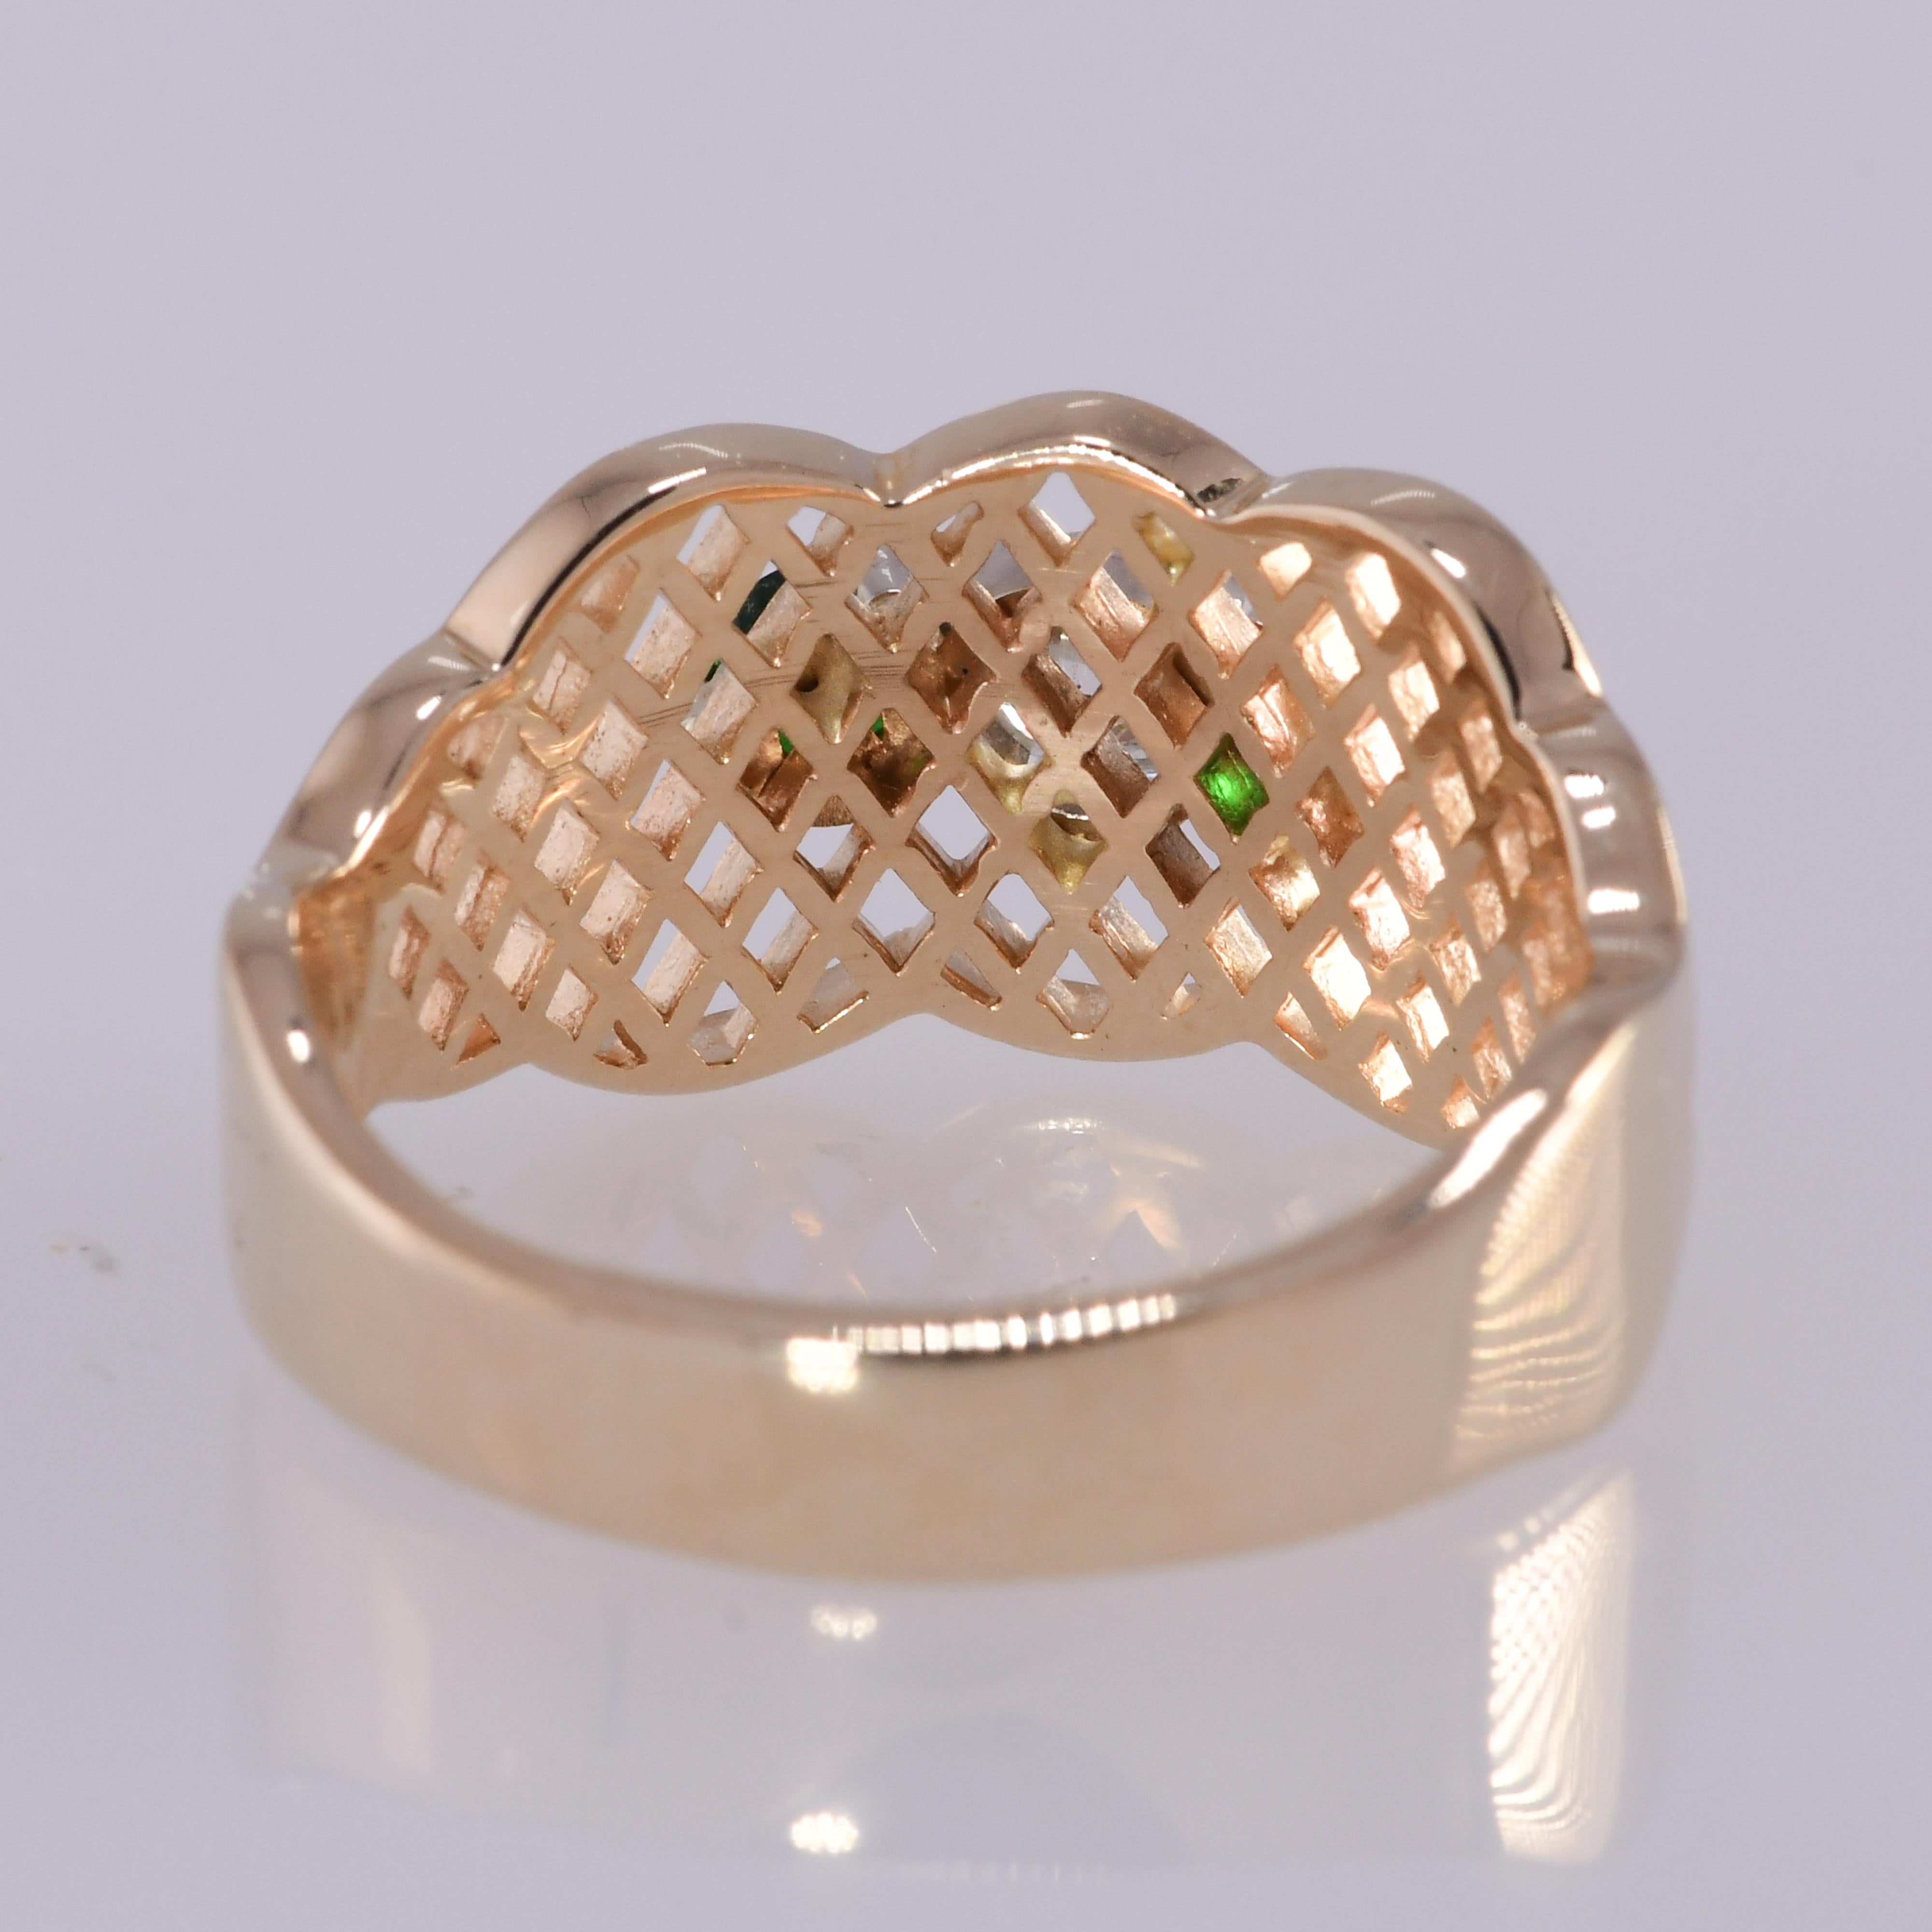 Beautiful open latticework band style ring containing .29 carat diamond and two round brilliant natural tsavorite garnets. The quality of the diamond is I1; H-I. The tsavorites have a deep vibrant green hue. The ring measures 7/8 inch wide and 7/16